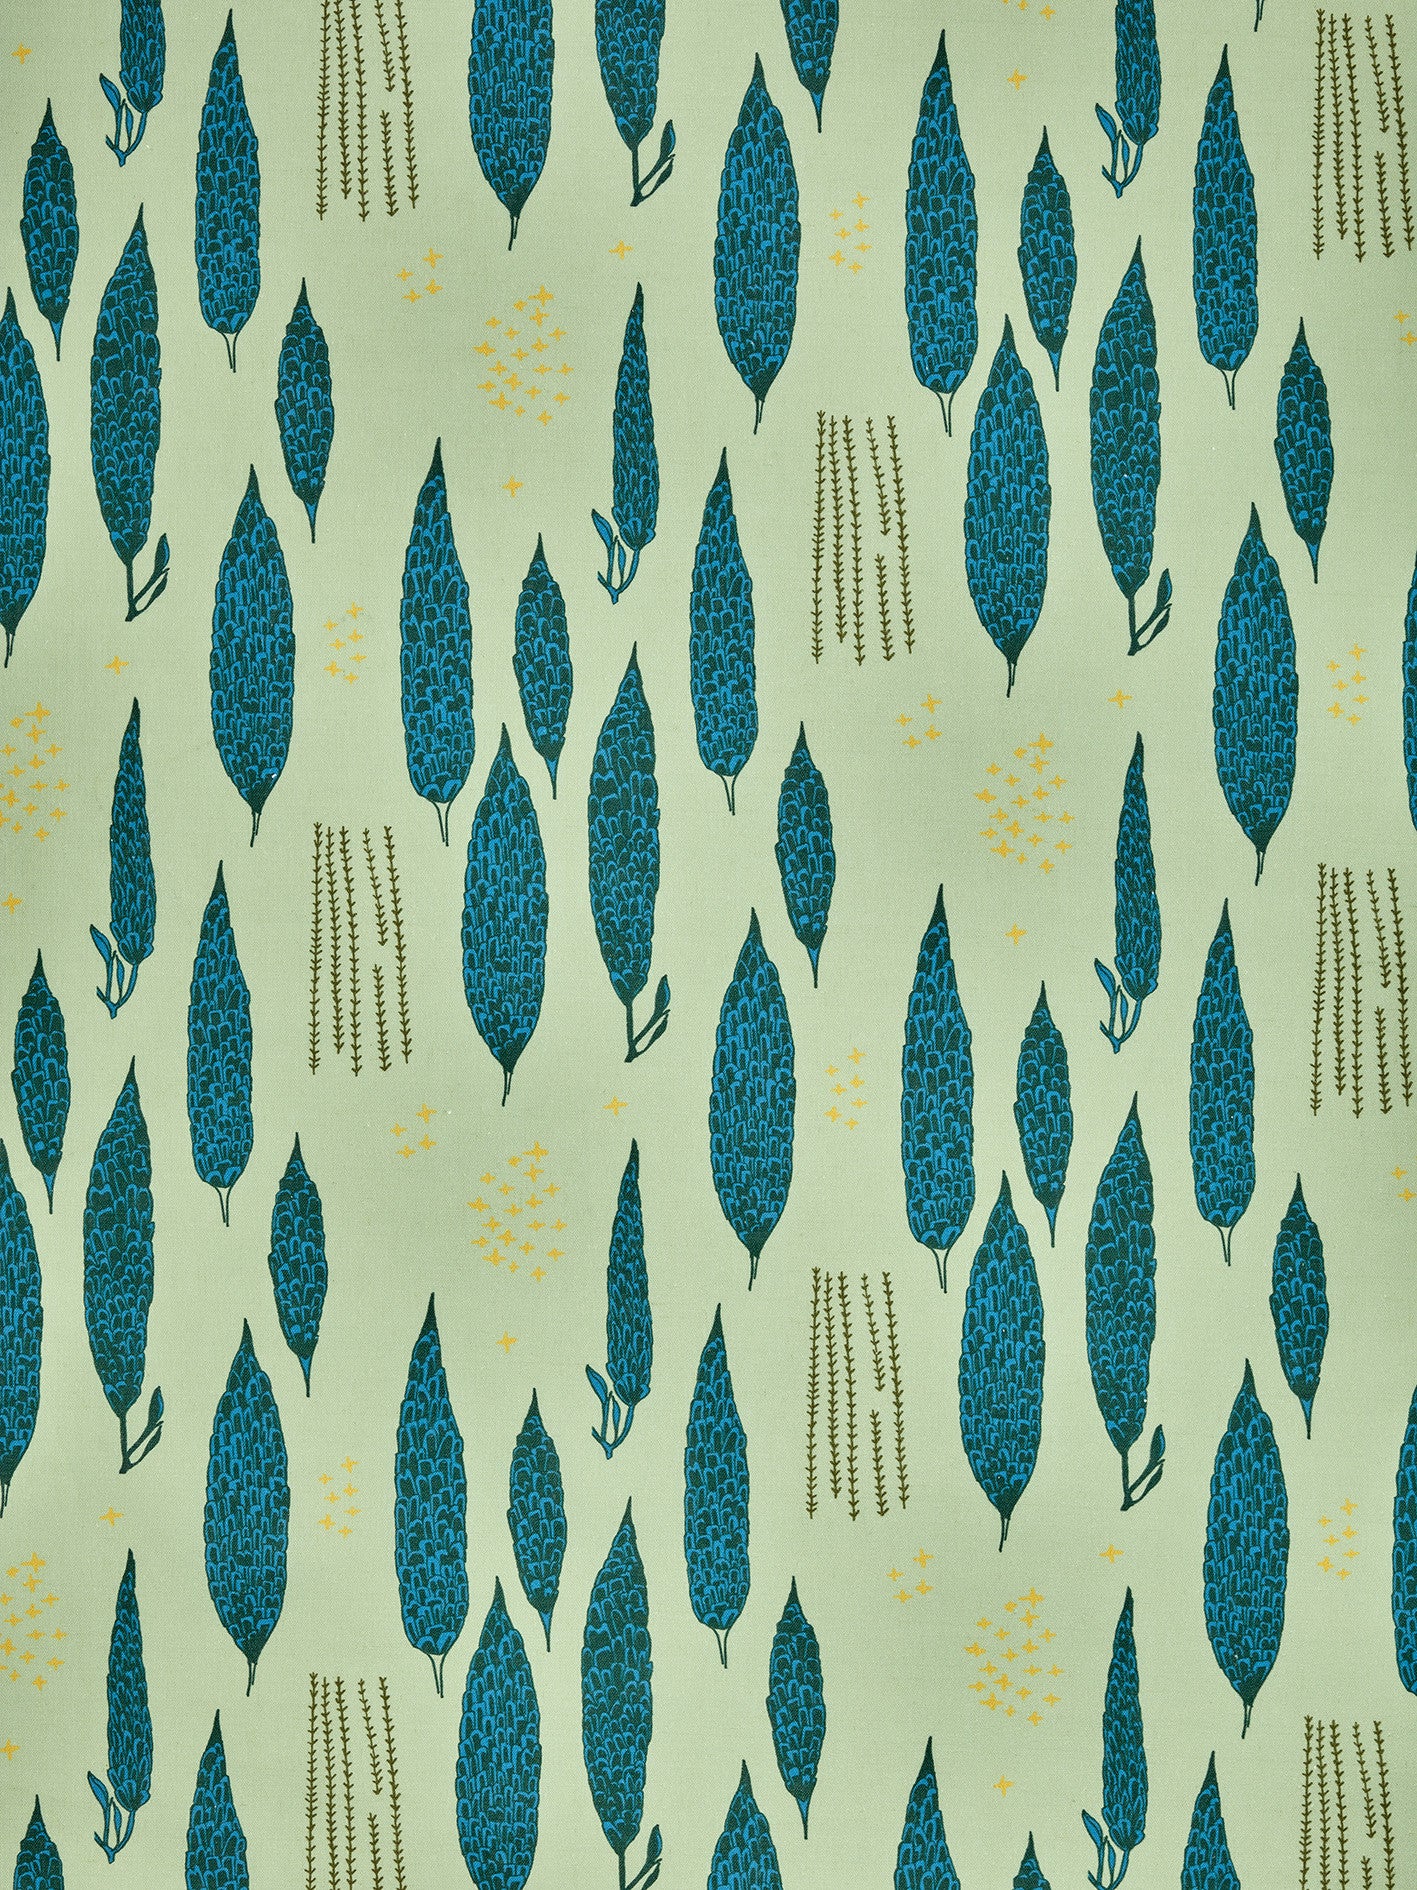 Graphic Rosemary Sprig Pattern Printed Linen Cotton Canvas Home Decor Fabric by the meter or by the yard for curtains, blinds or upholstery in Light Eau de Nil Green and Turquoise Blue ships form Canada (USA)